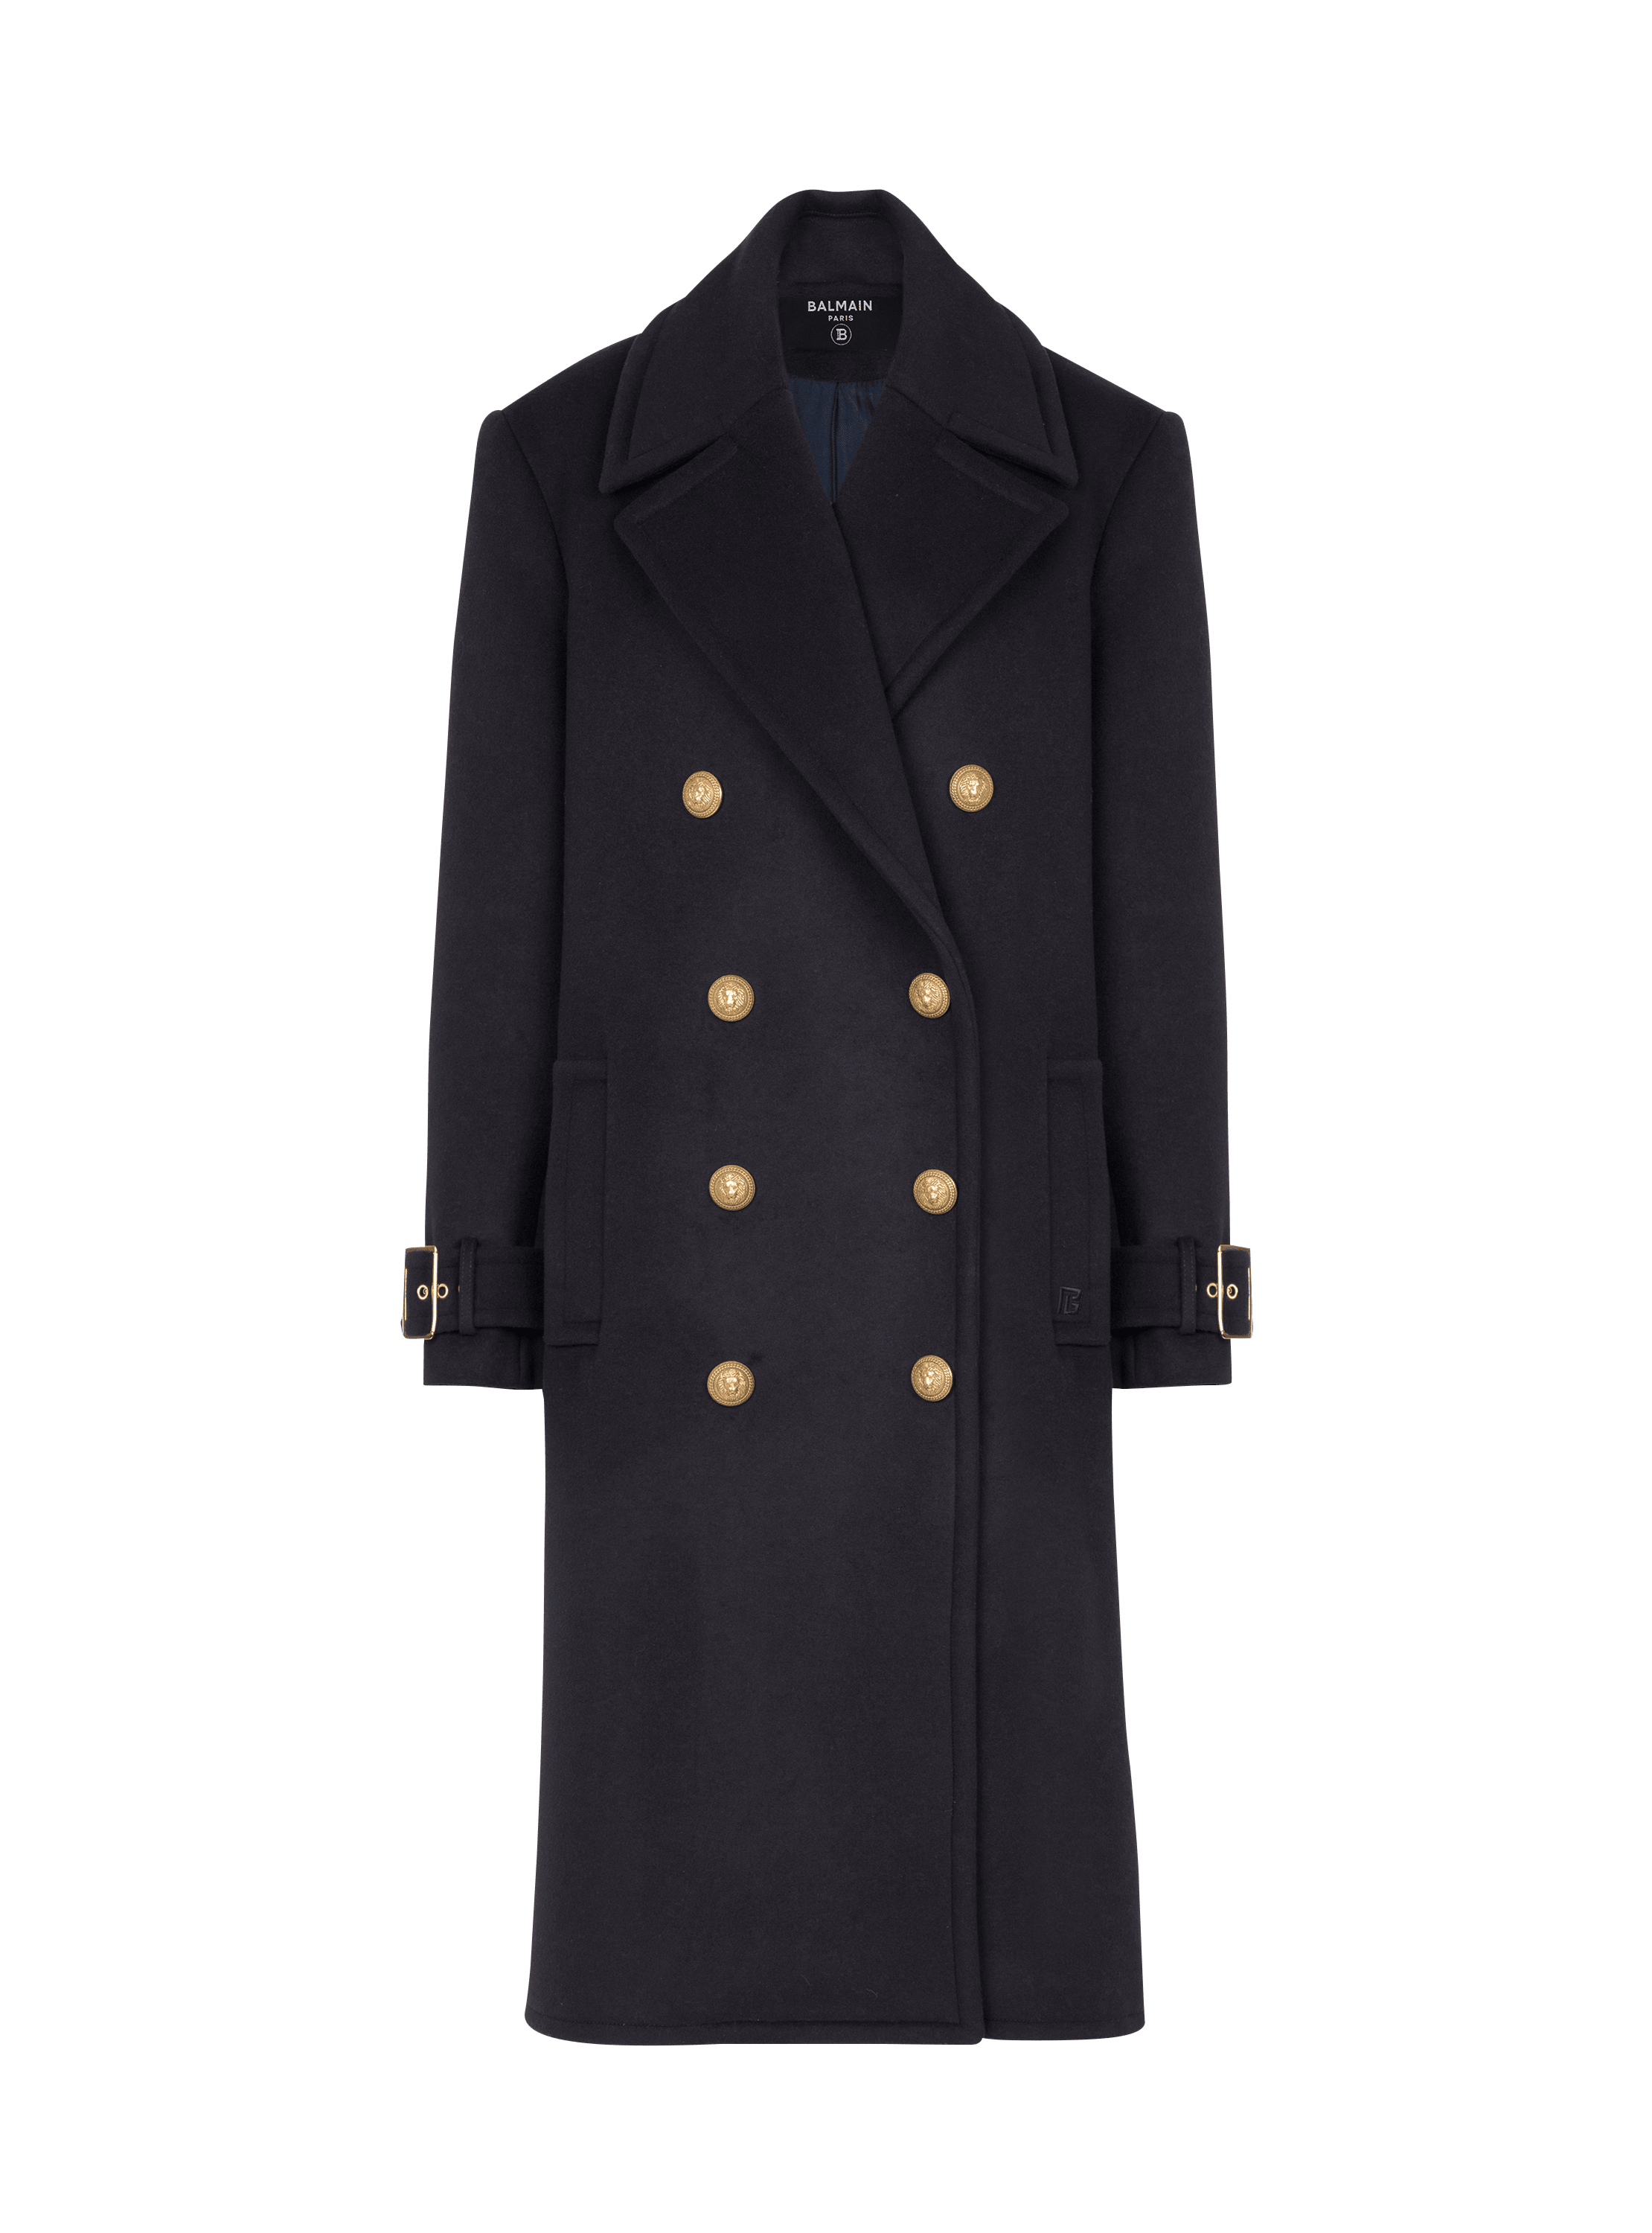 Oversized double-breasted coat, navy, hi-res